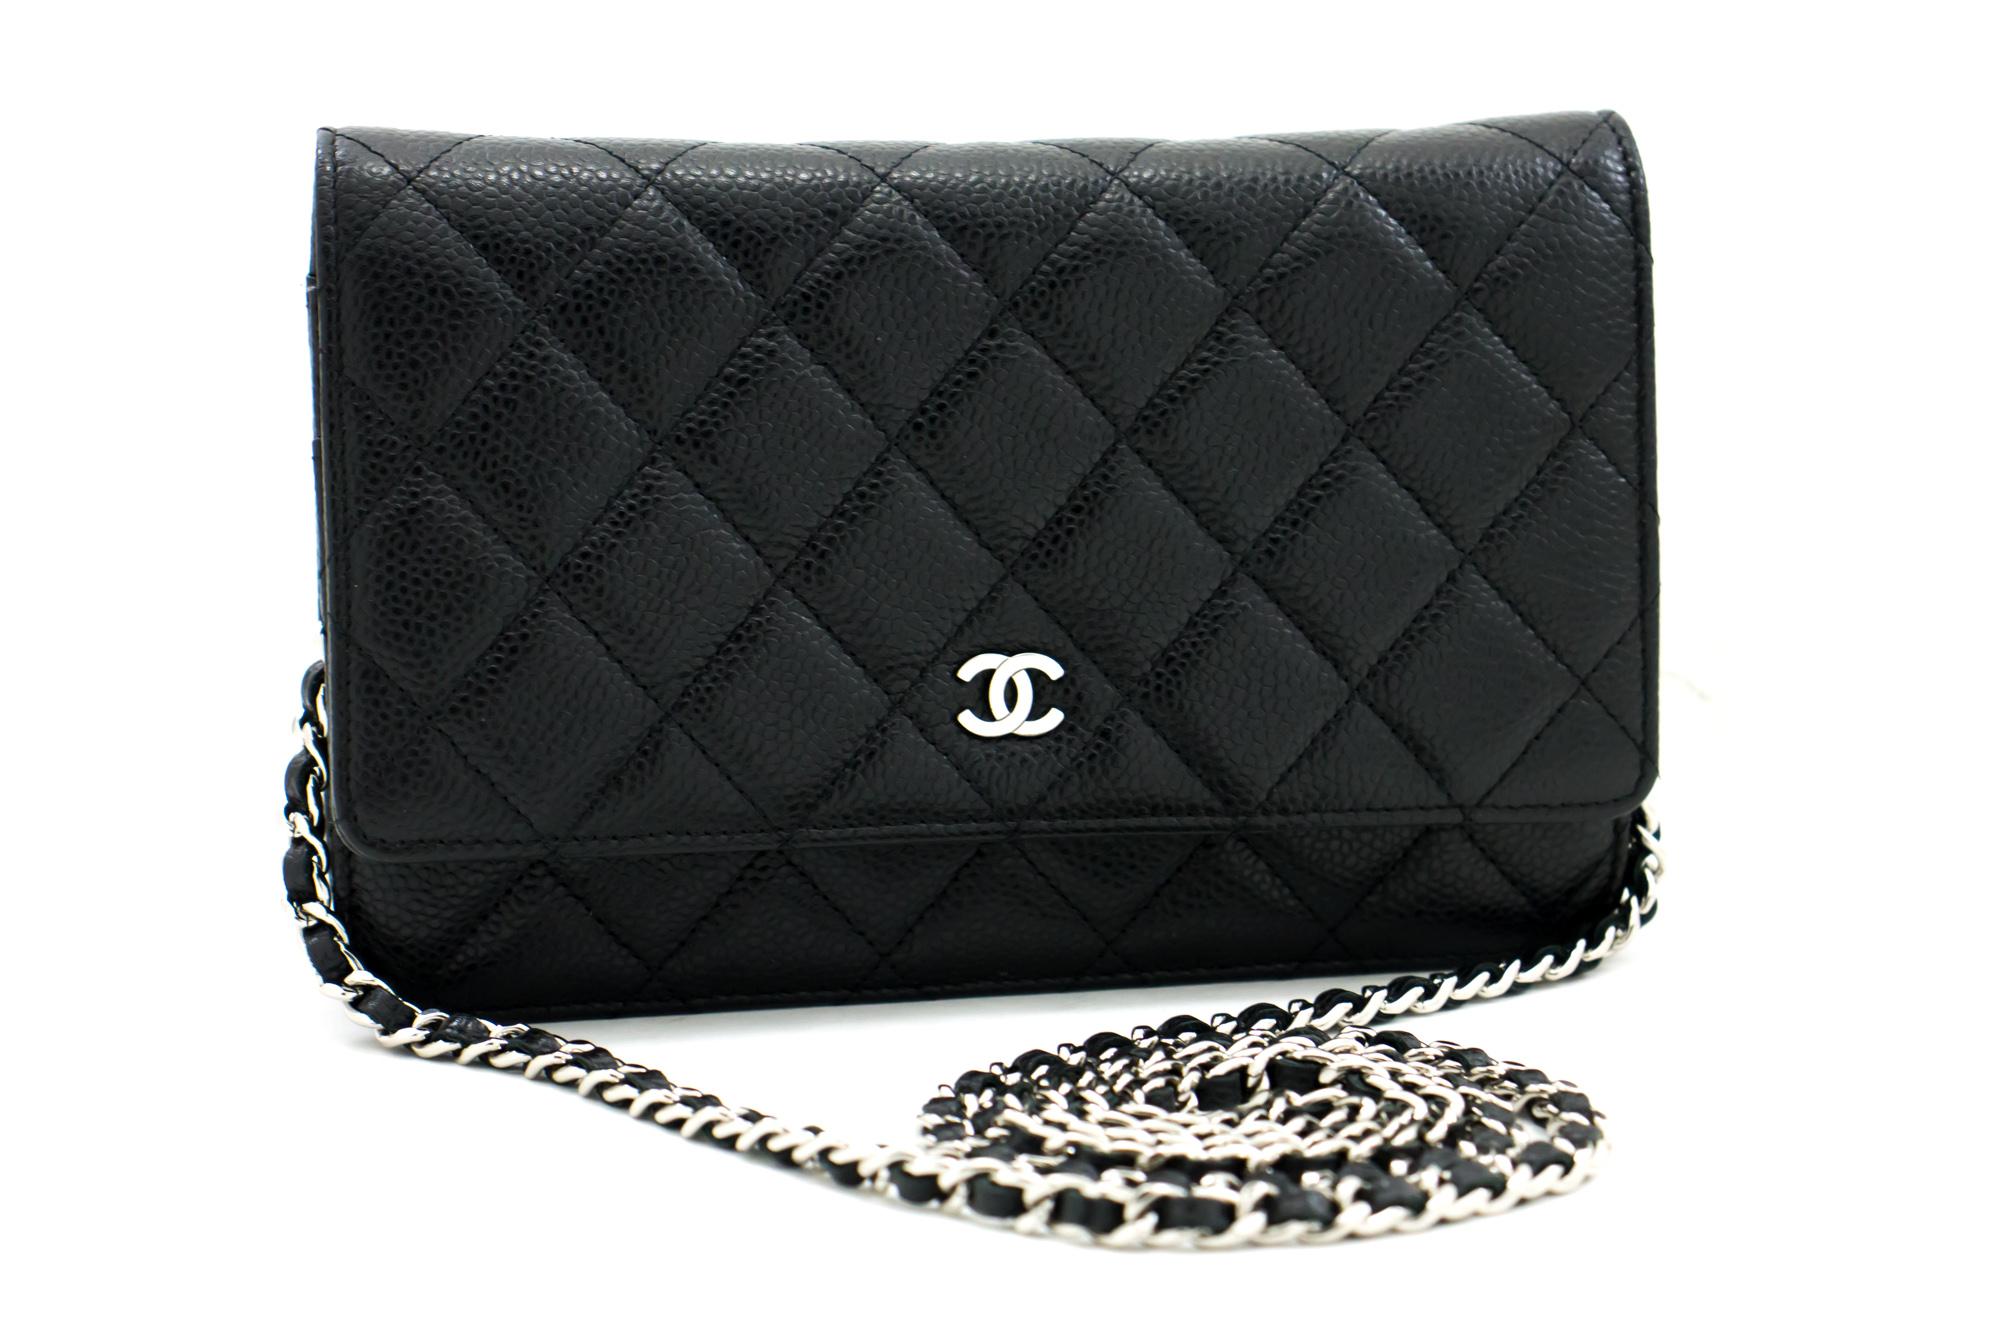 An authentic CHANEL Caviar Wallet On Chain WOC Black Shoulder Bag Crossbody. The color is Black. The outside material is Leather. The pattern is Solid. This item is Contemporary. The year of manufacture would be 2012.
Conditions & Ratings
Outside